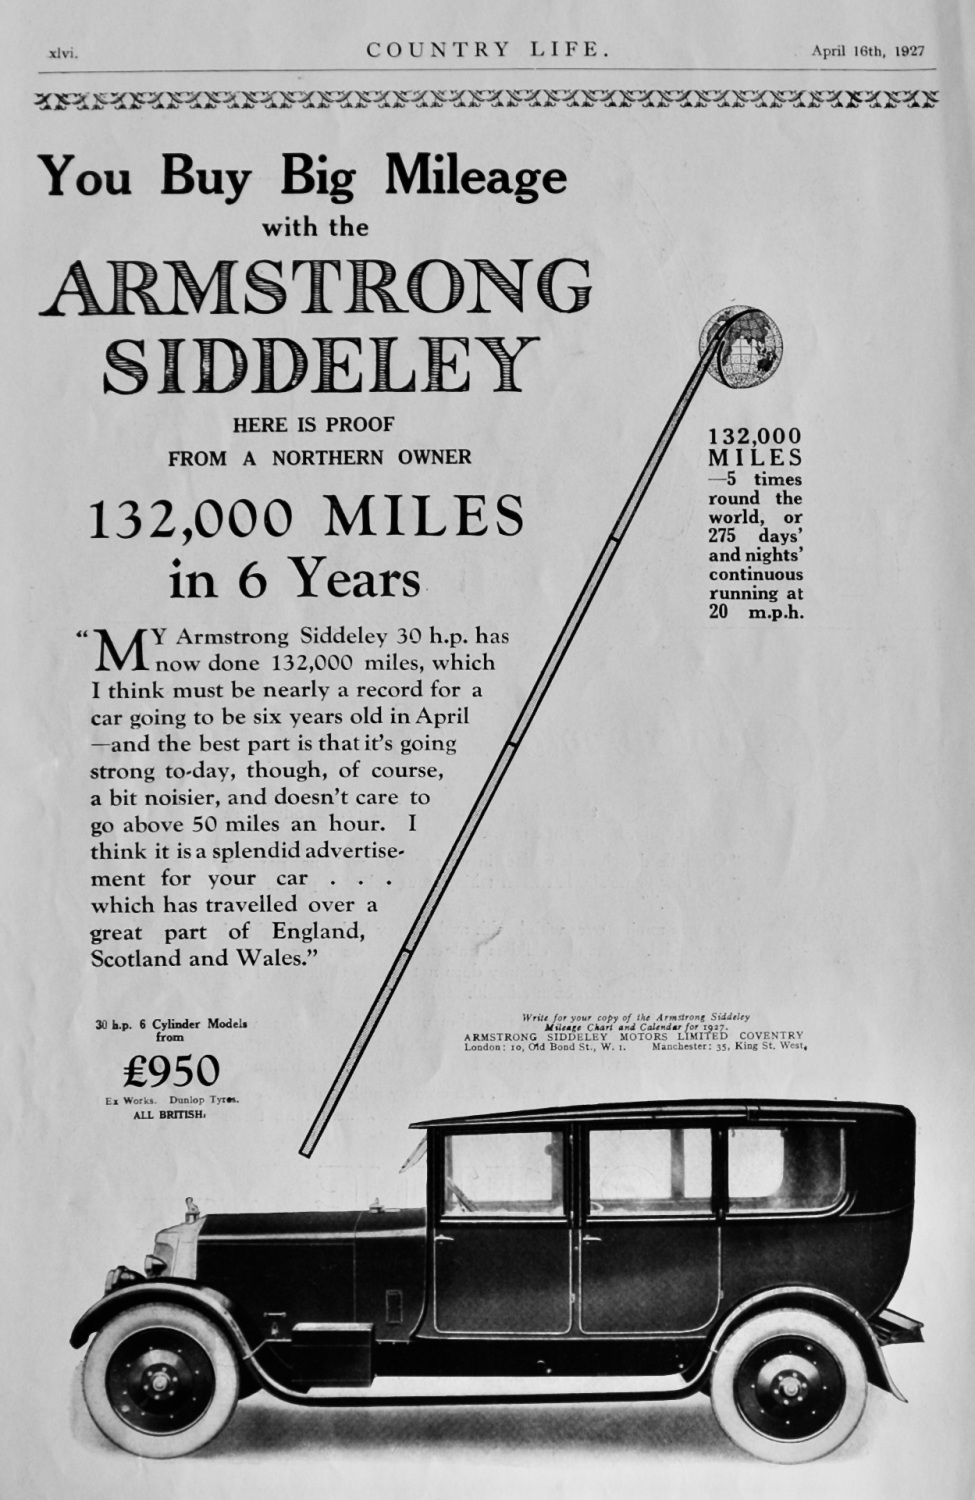 Armstrong Siddeley Motors Limited.  1927.